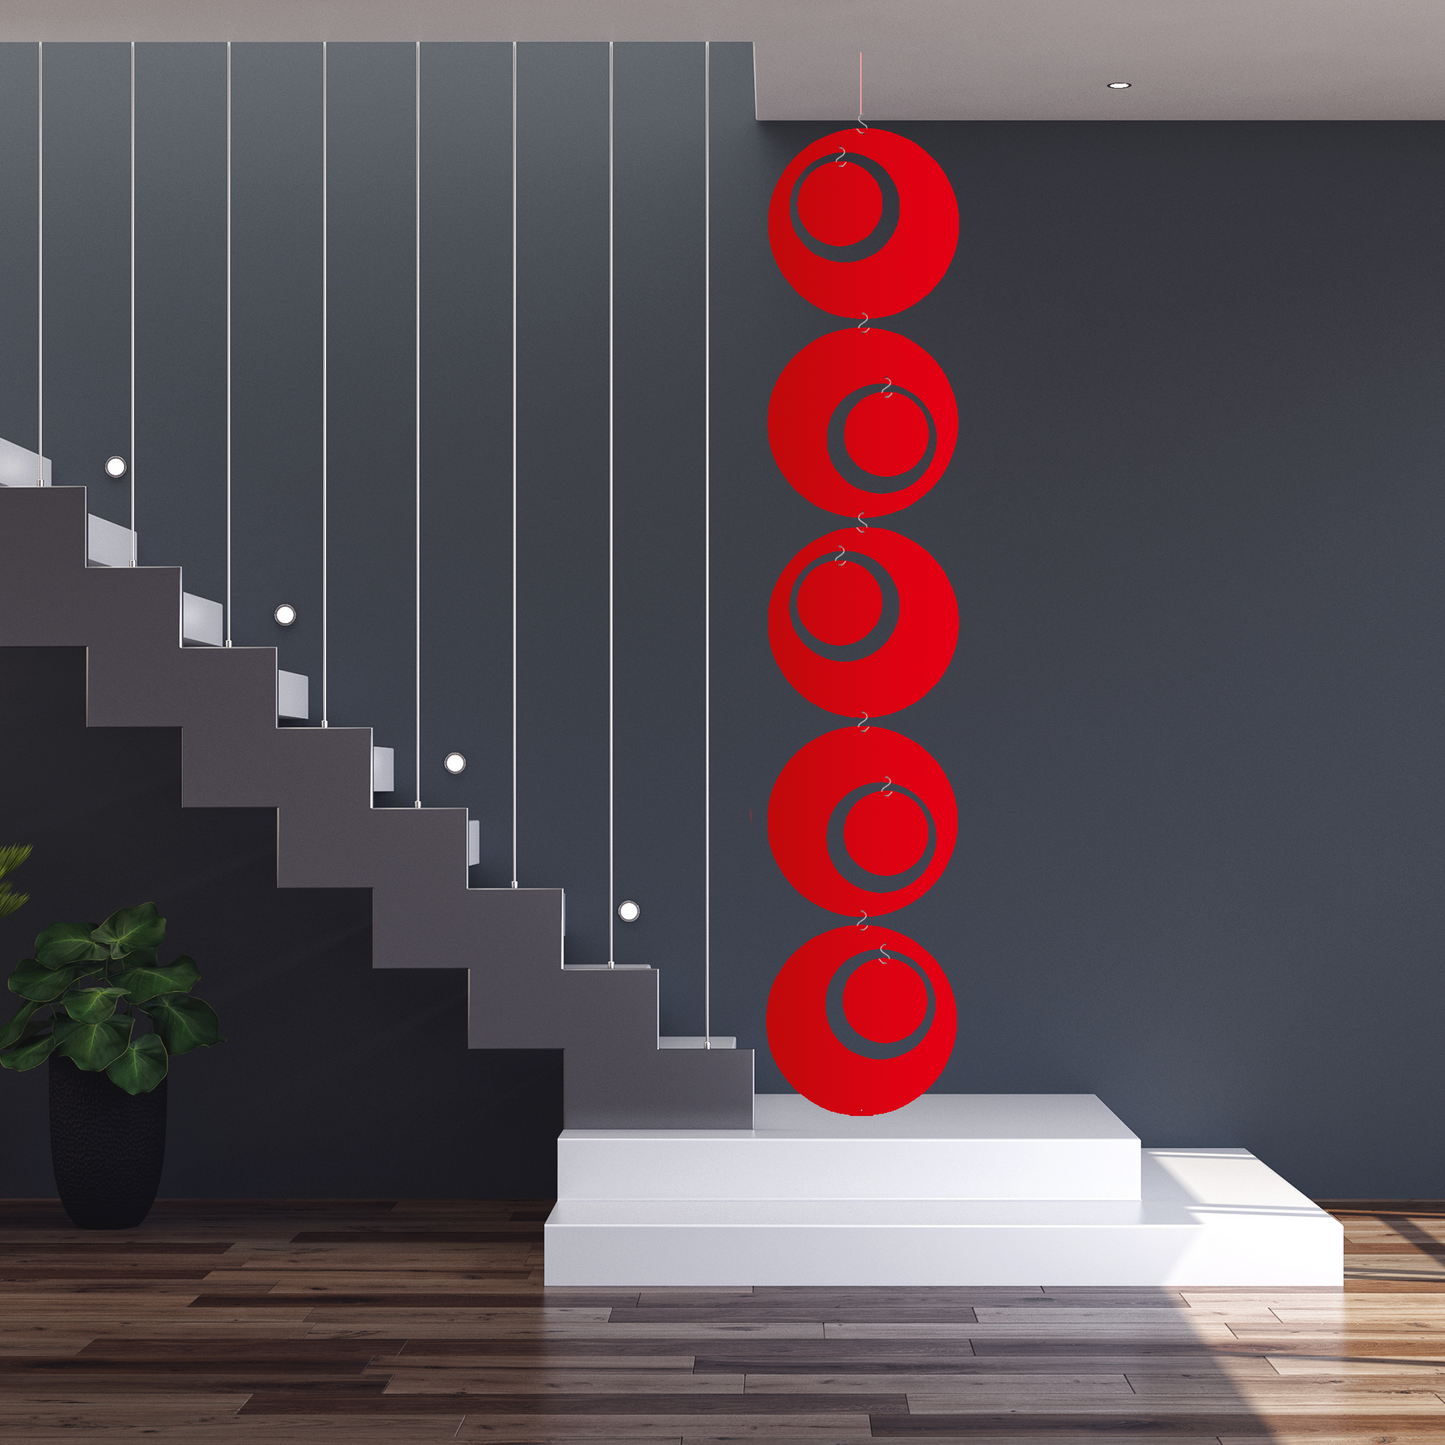 Red XL Groovy Hanging Art Mobile at landing of modern stairwell - mid century modern retro mobiles by AtomicMobiles.com